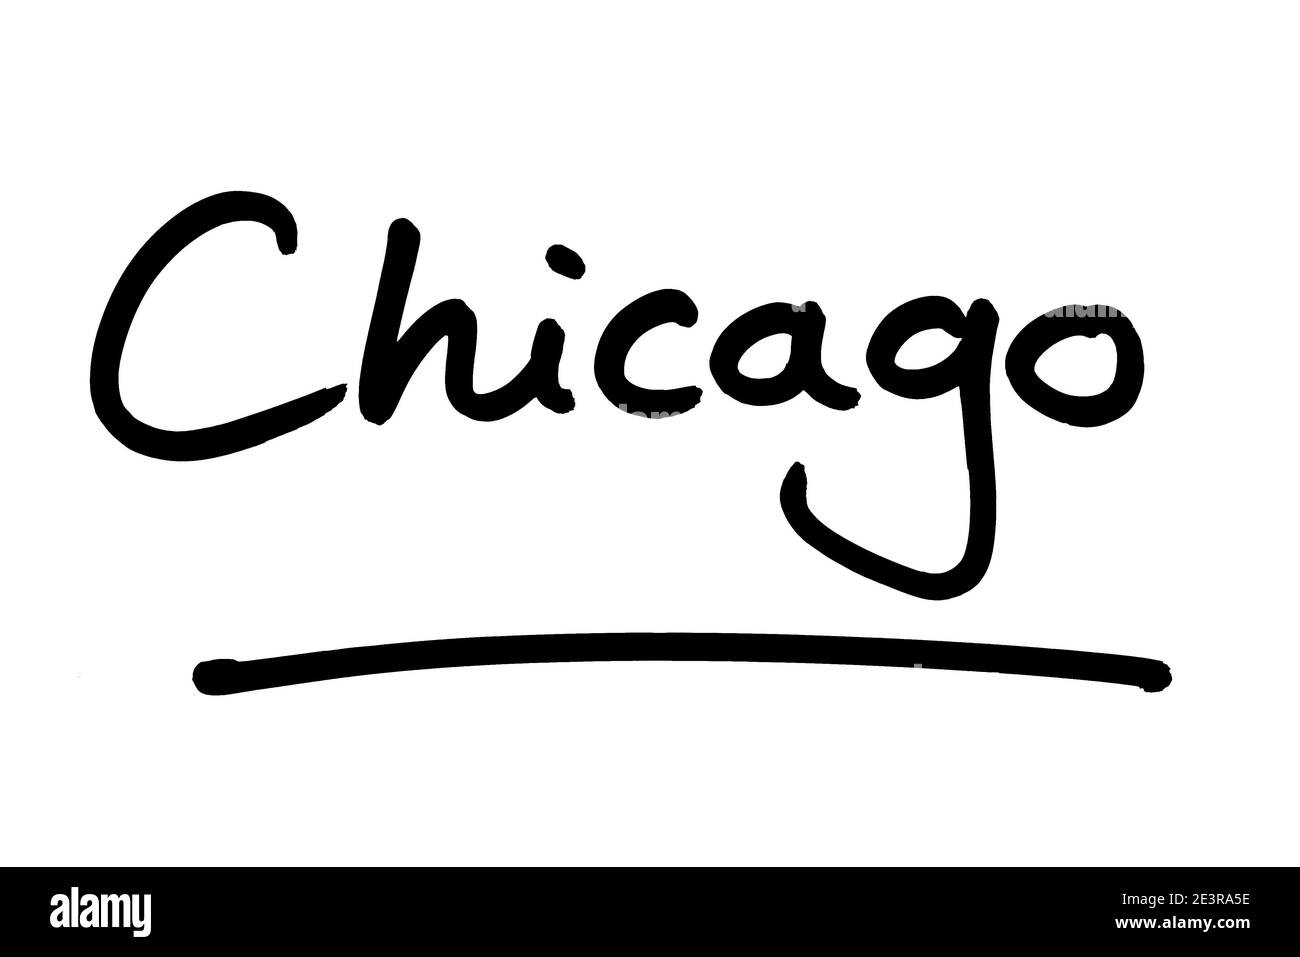 Chicago - a city in the state of Illinois, in the United States of America. Stock Photo